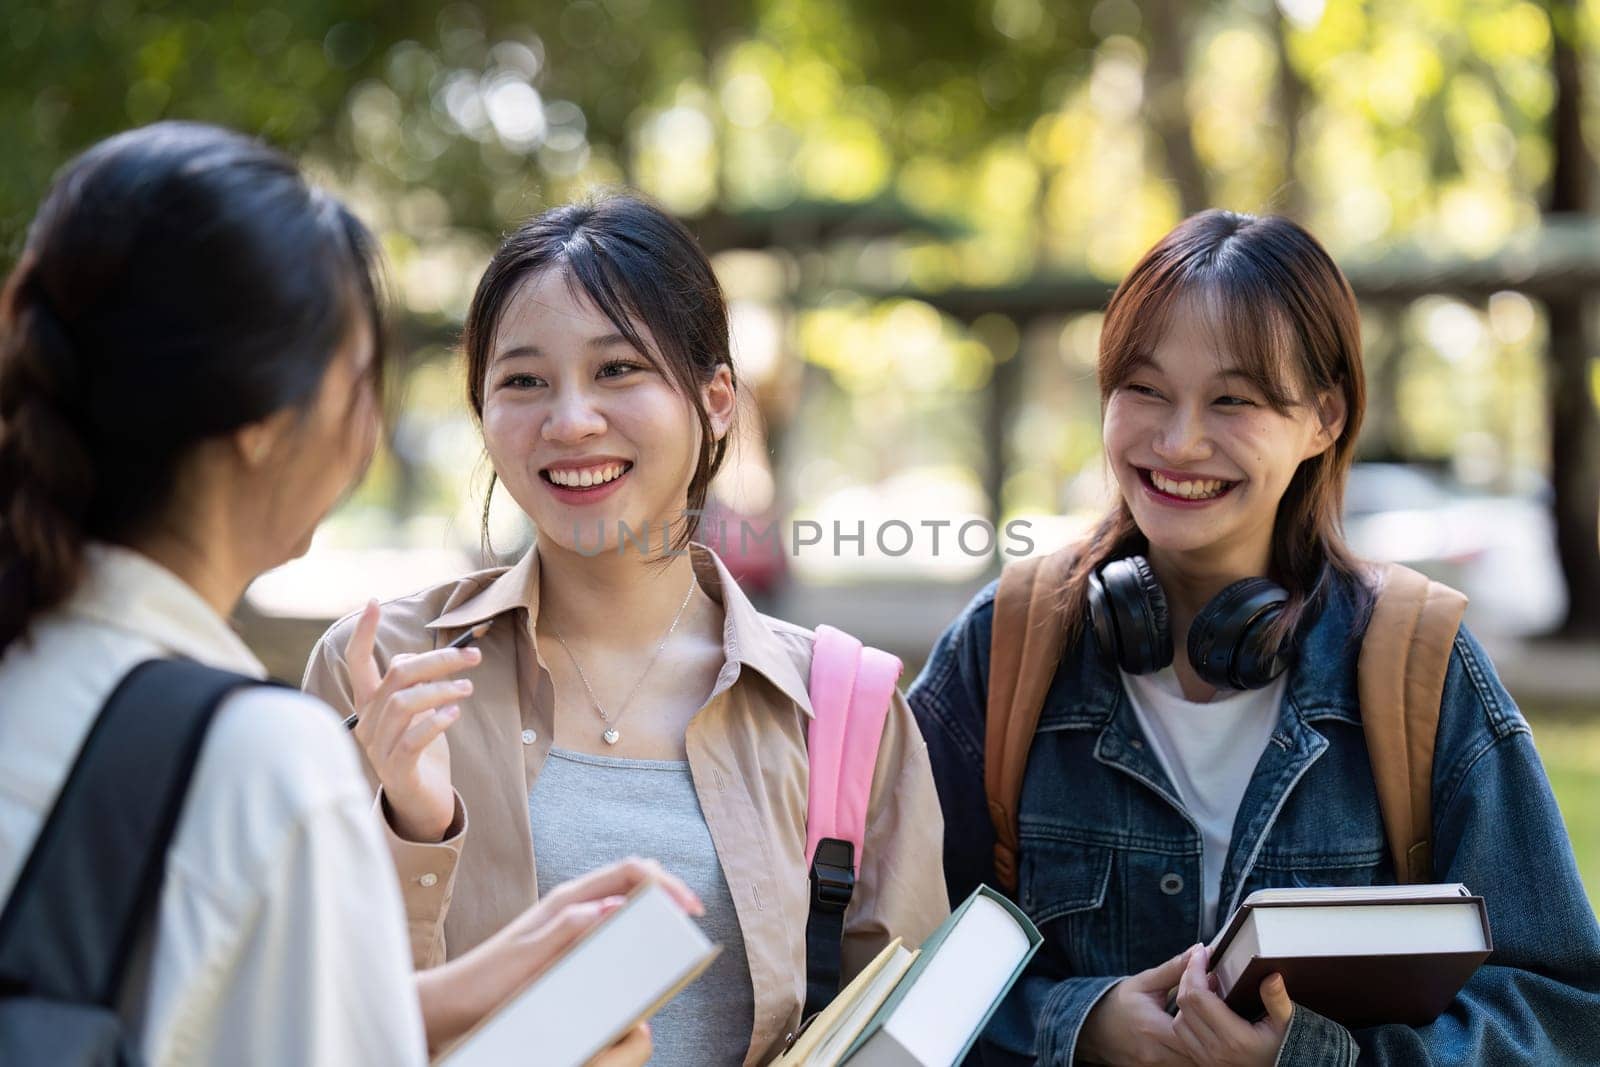 Happy students walking together on university campus, chatting and laughing outdoors after classes.